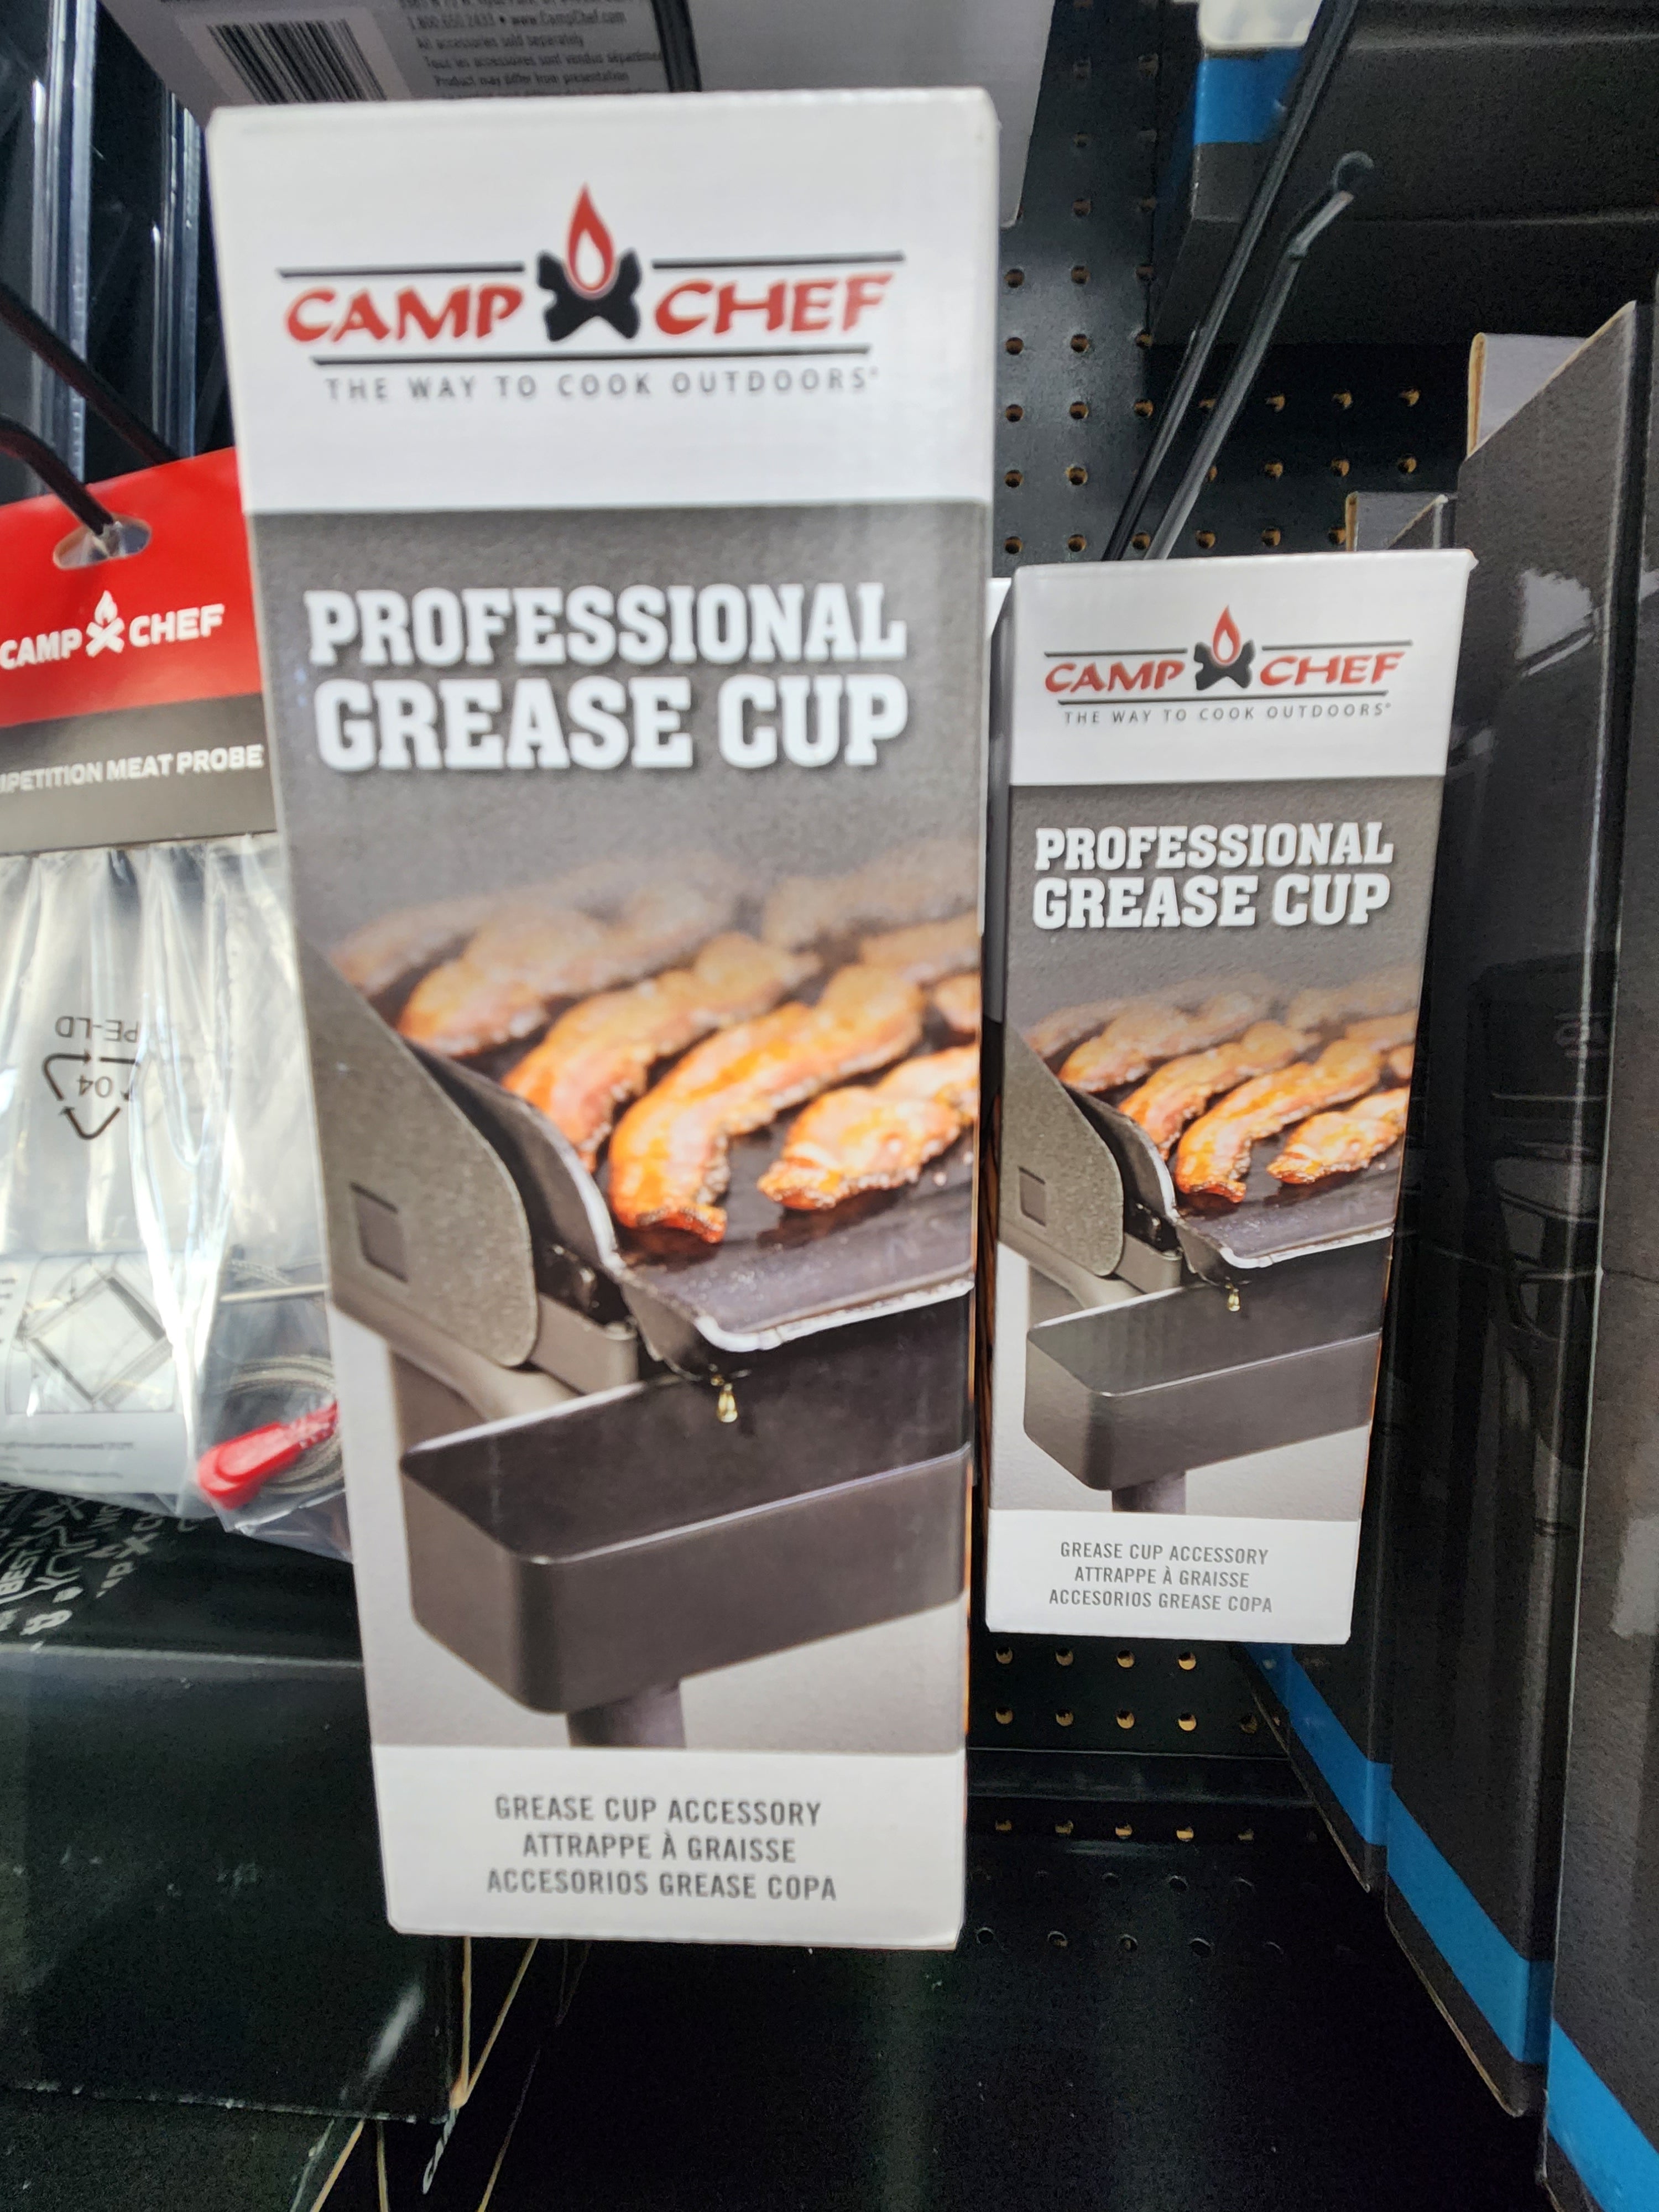 Camp Chef Professional Grease Cup